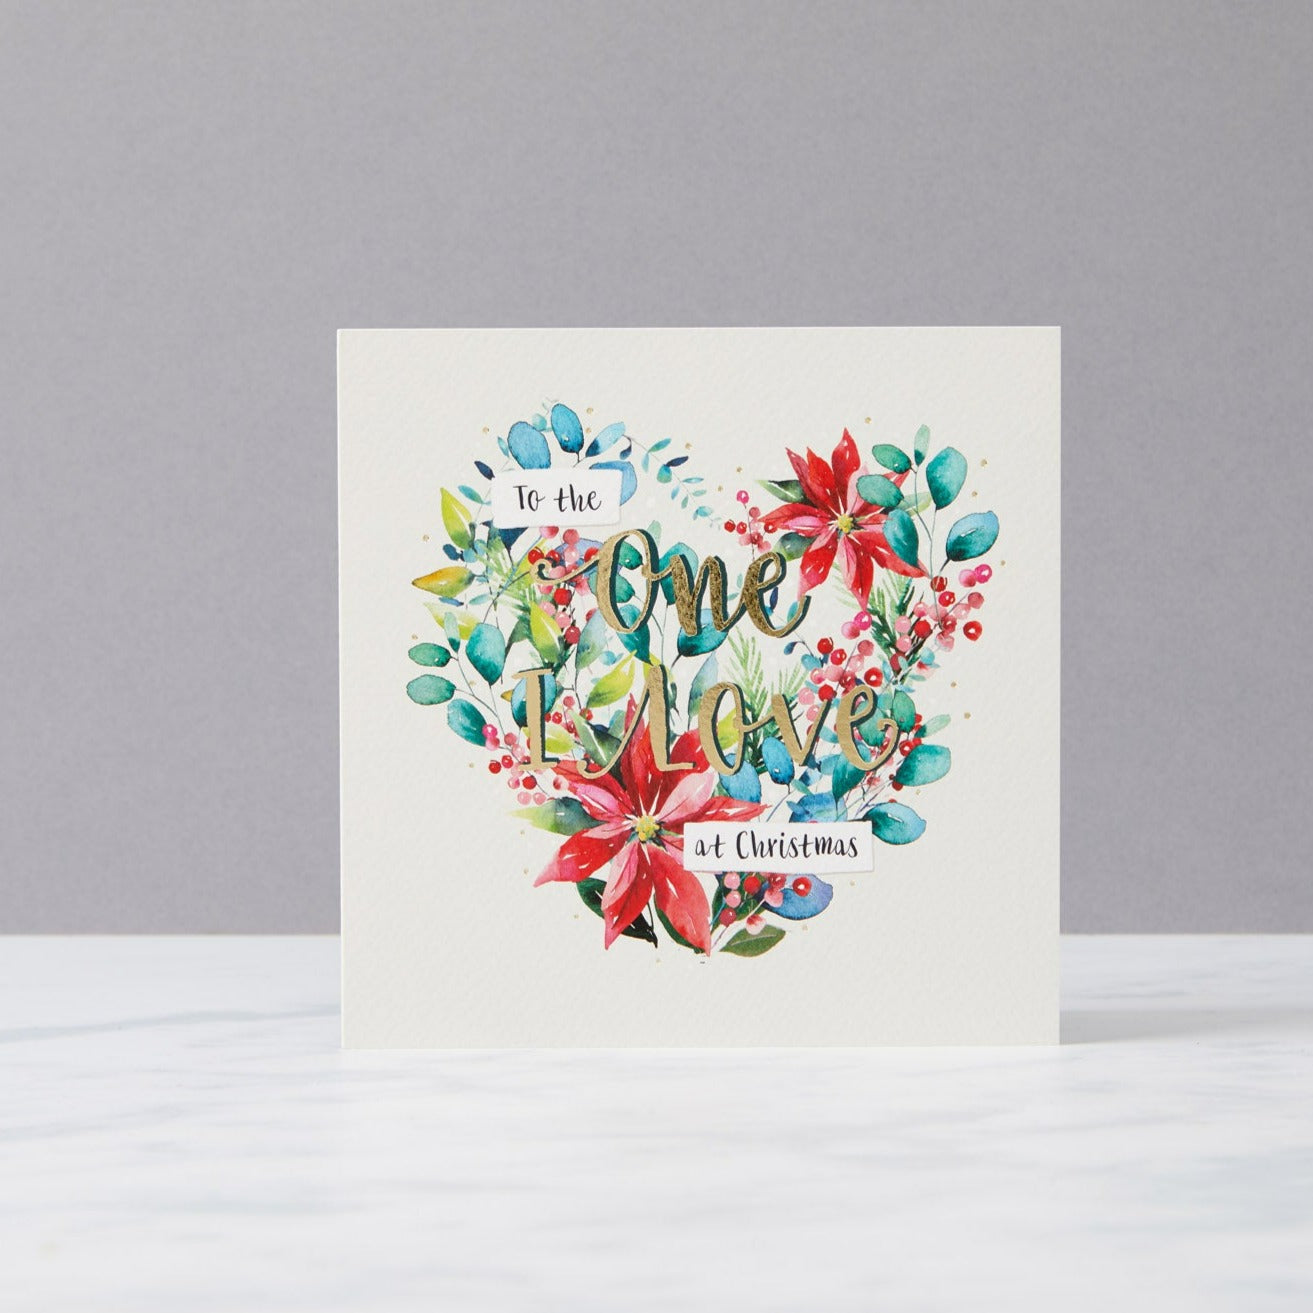 Floral heart card reads "to the one I love at Christmas"